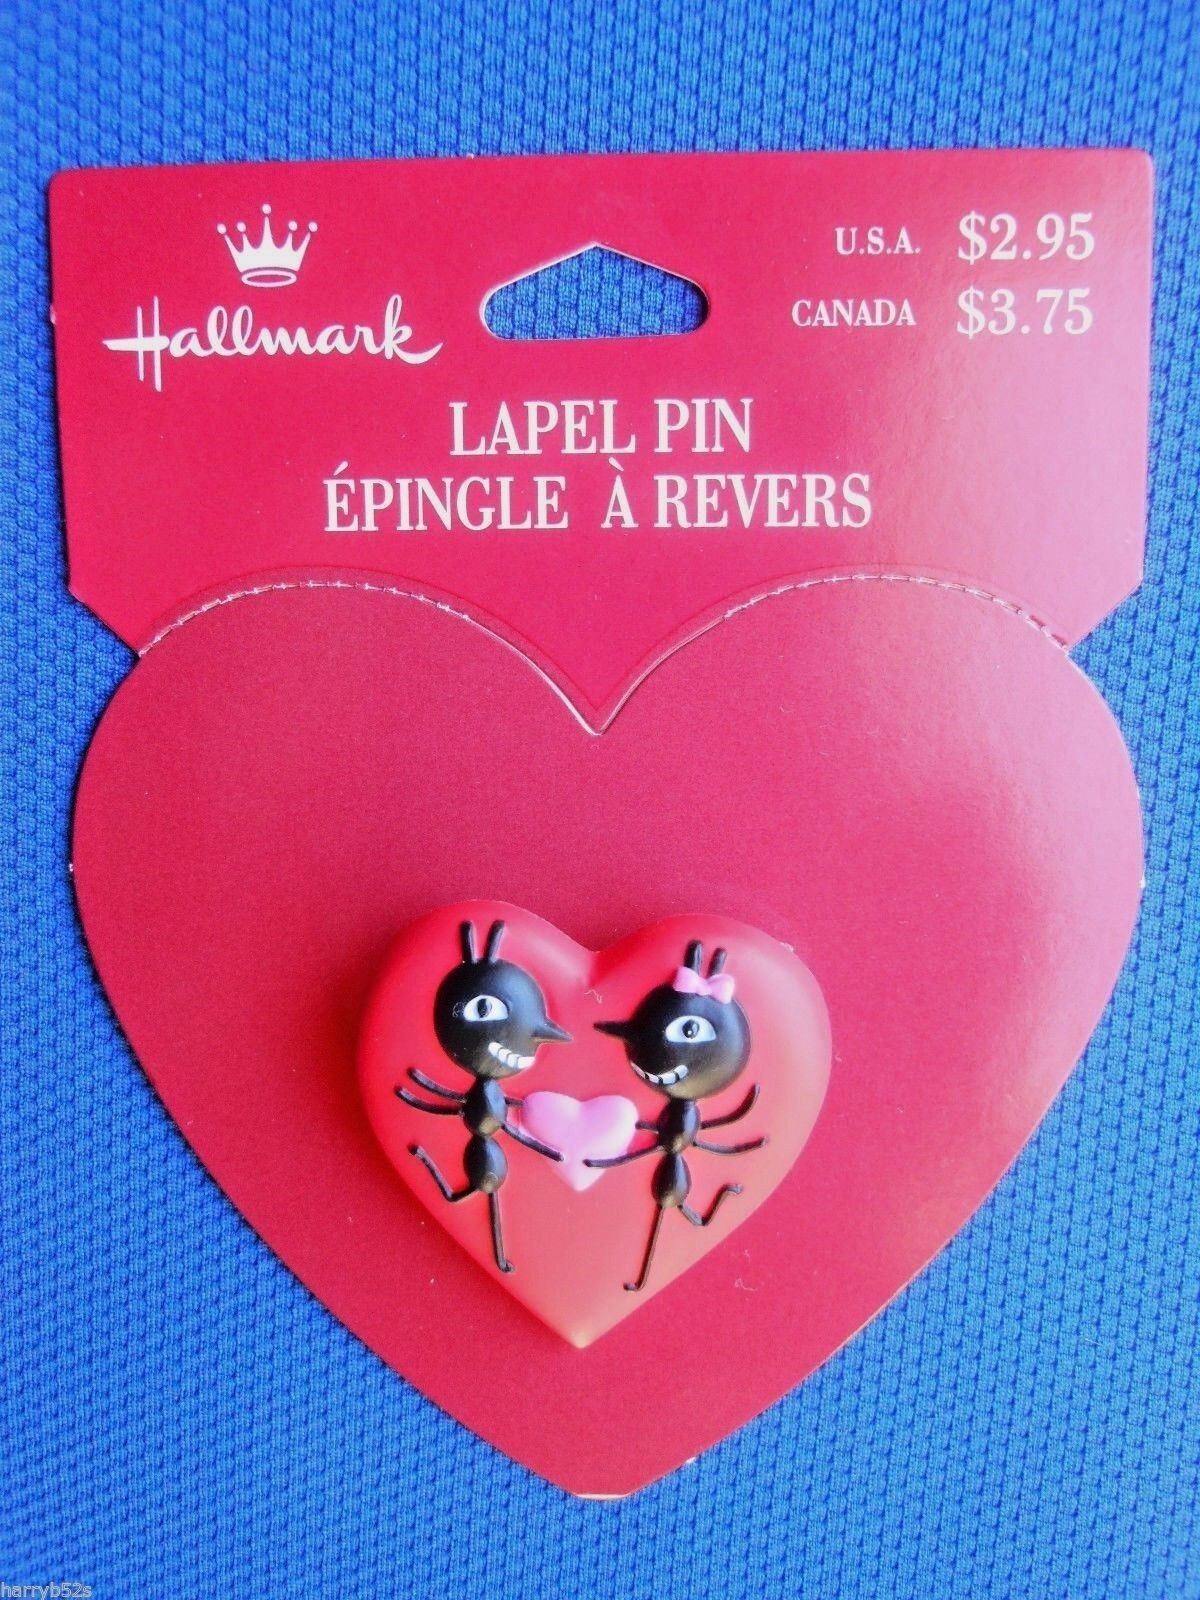 HALLMARK Valentine Day PIN Couple of Black Ants with Heart HOLIDAY LAPEL PIN-NOC